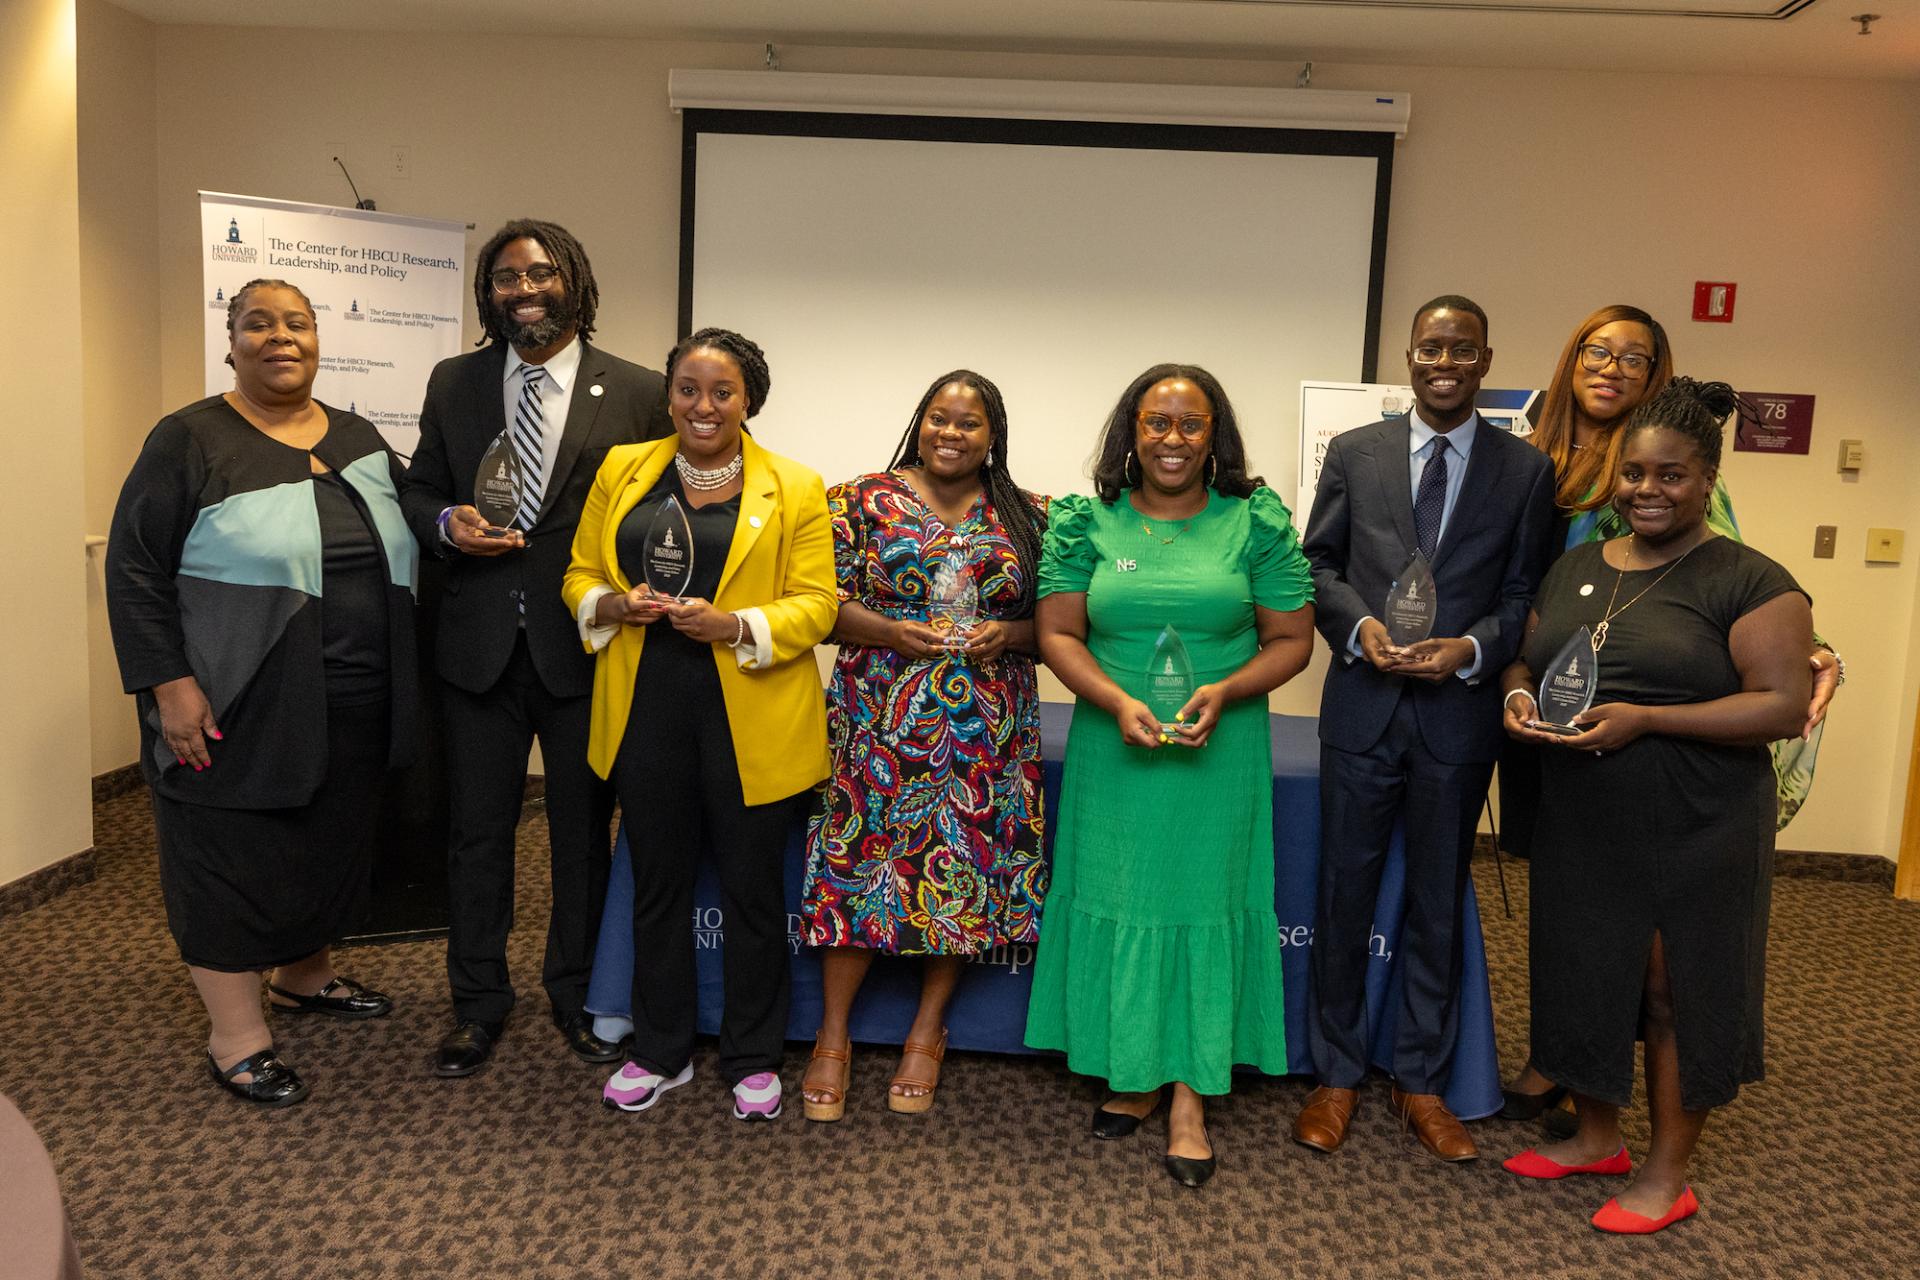 Members of the inaugural class of the 2023 HBCU Center Fellows are awarded for their research work in the HBCU leadership and policy at the Inaugural Summer Invitational Conference.  Dr. Melanie Carter, J. Elijah Bratton, Stephanie Tilley, Brandy Jones, Brittani Williams, Dr. Magana Kabugi, Dr. Ebonierose Wade-Ndiaye, and Britt Spears-Rhymes